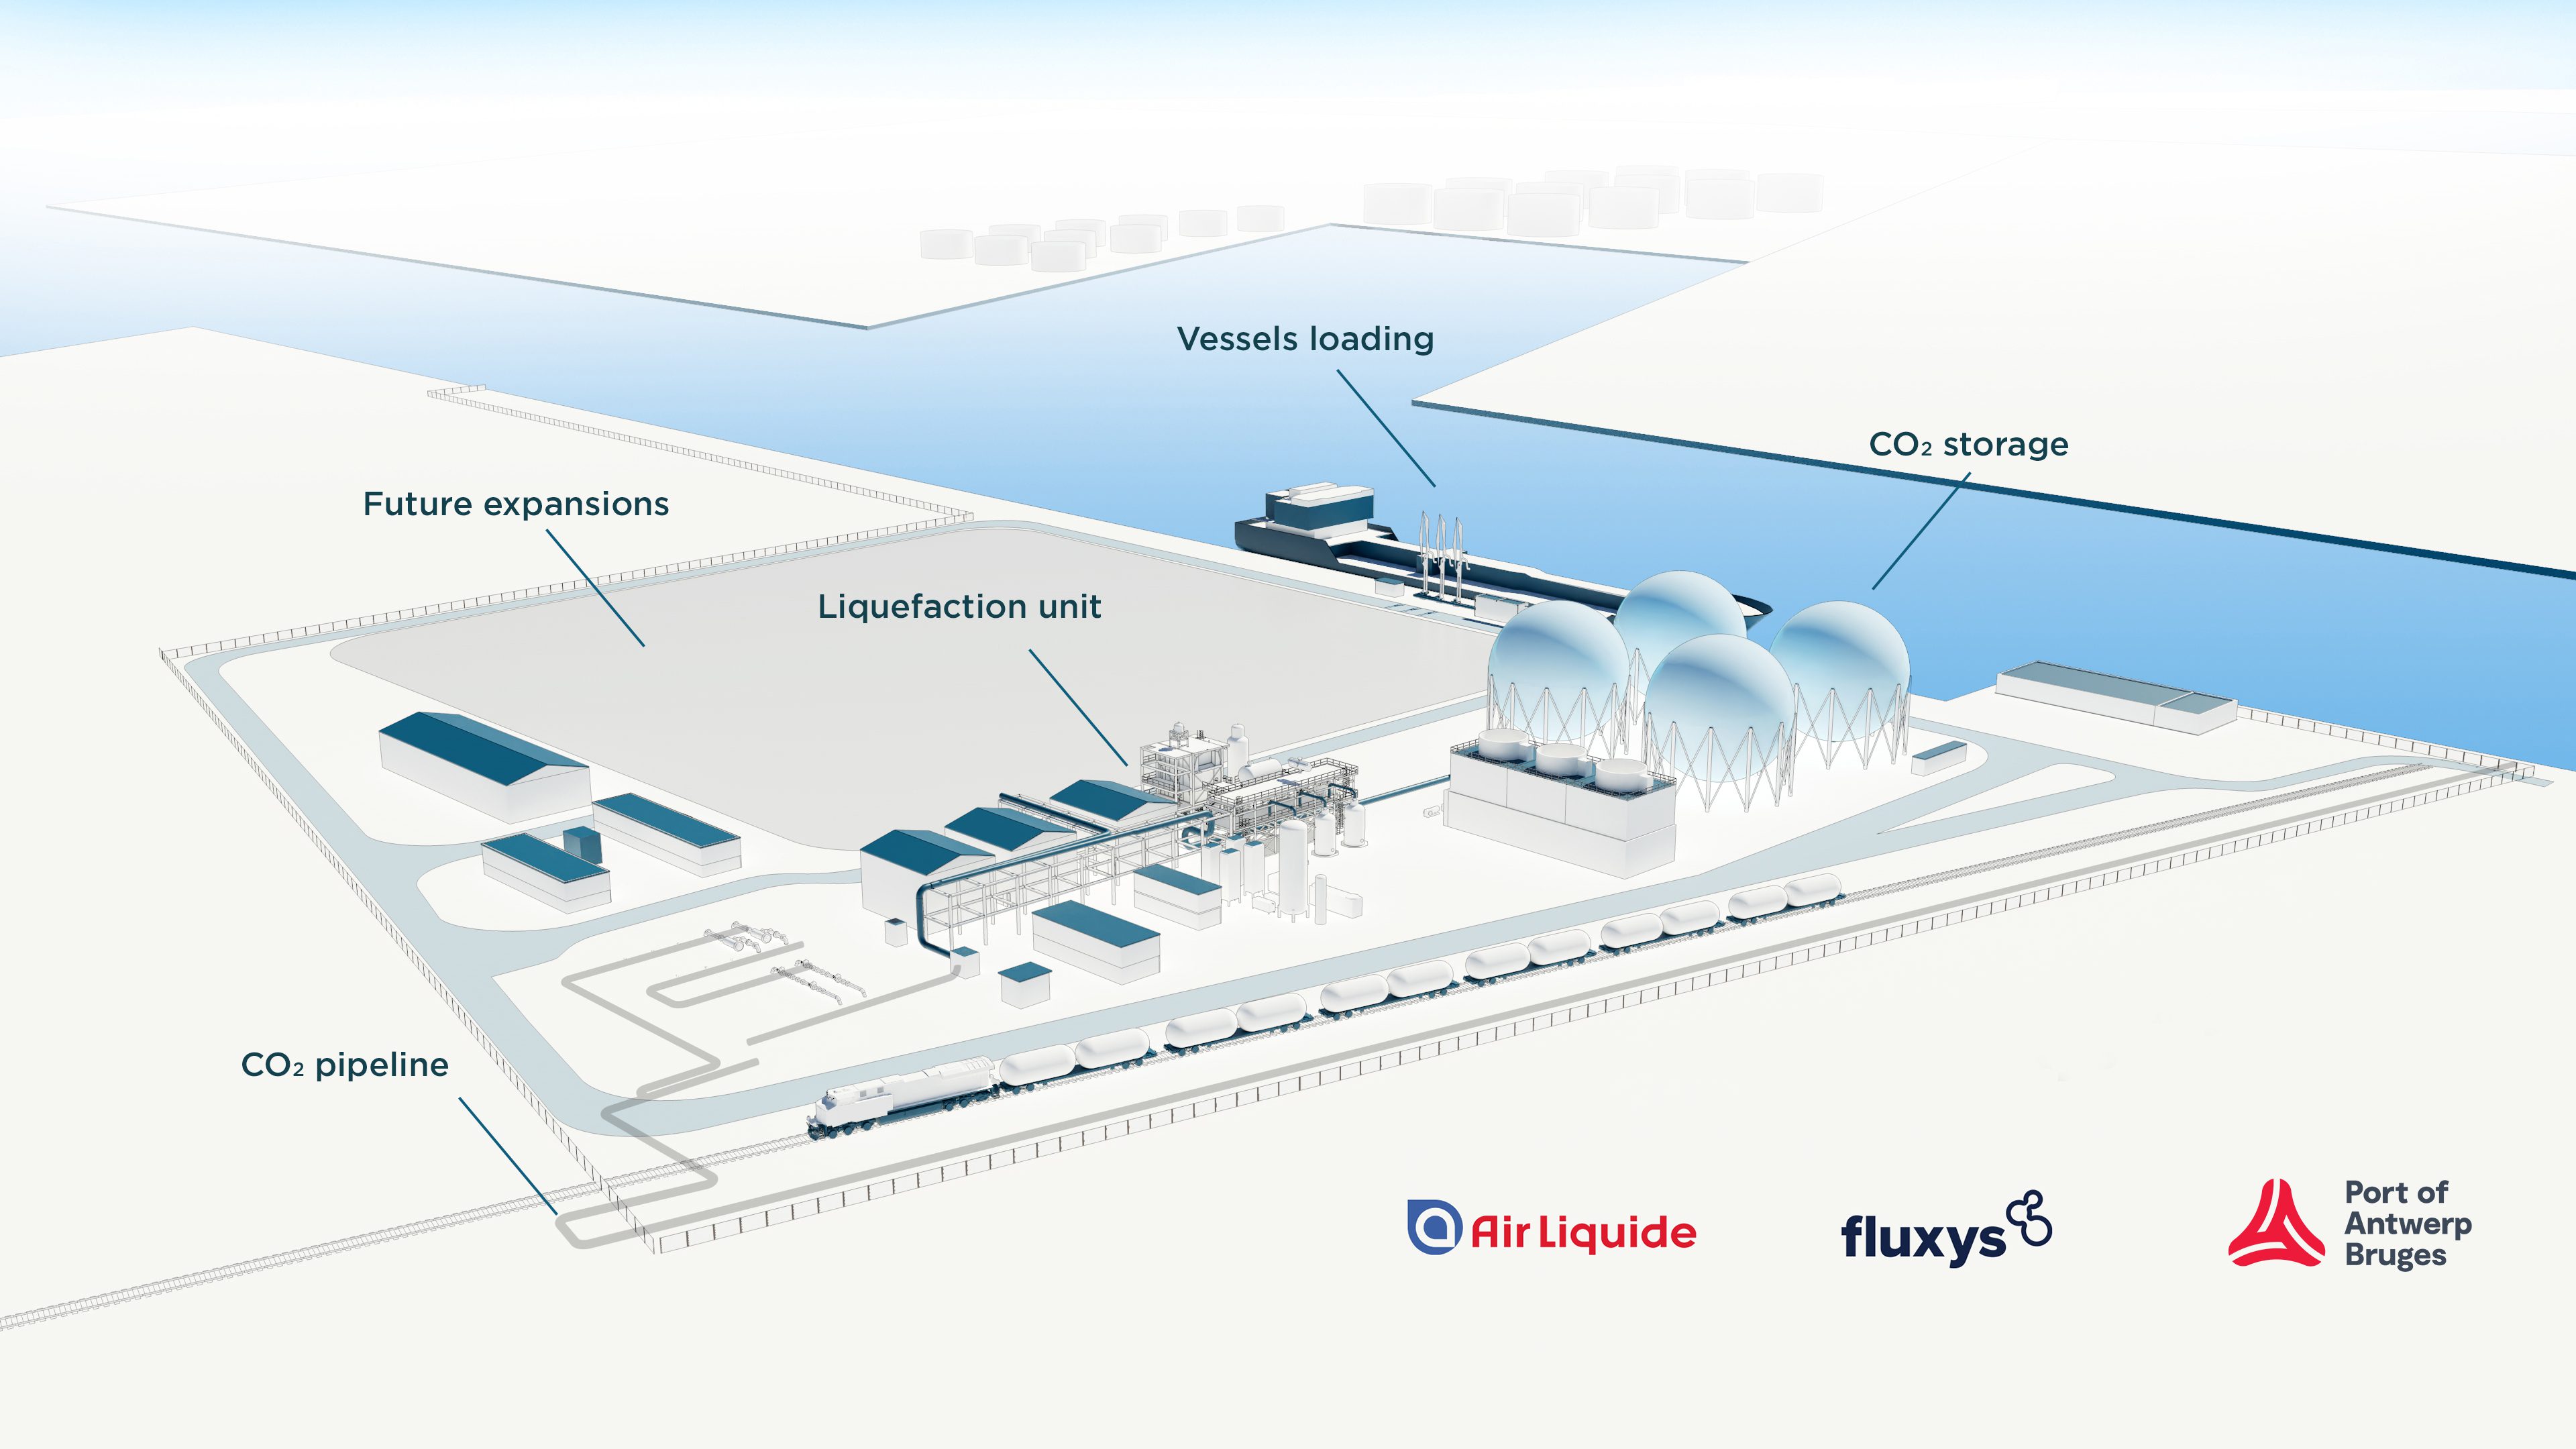 145 million for CO2 export hub in the Port of Antwerp, thanks to technical visualizations